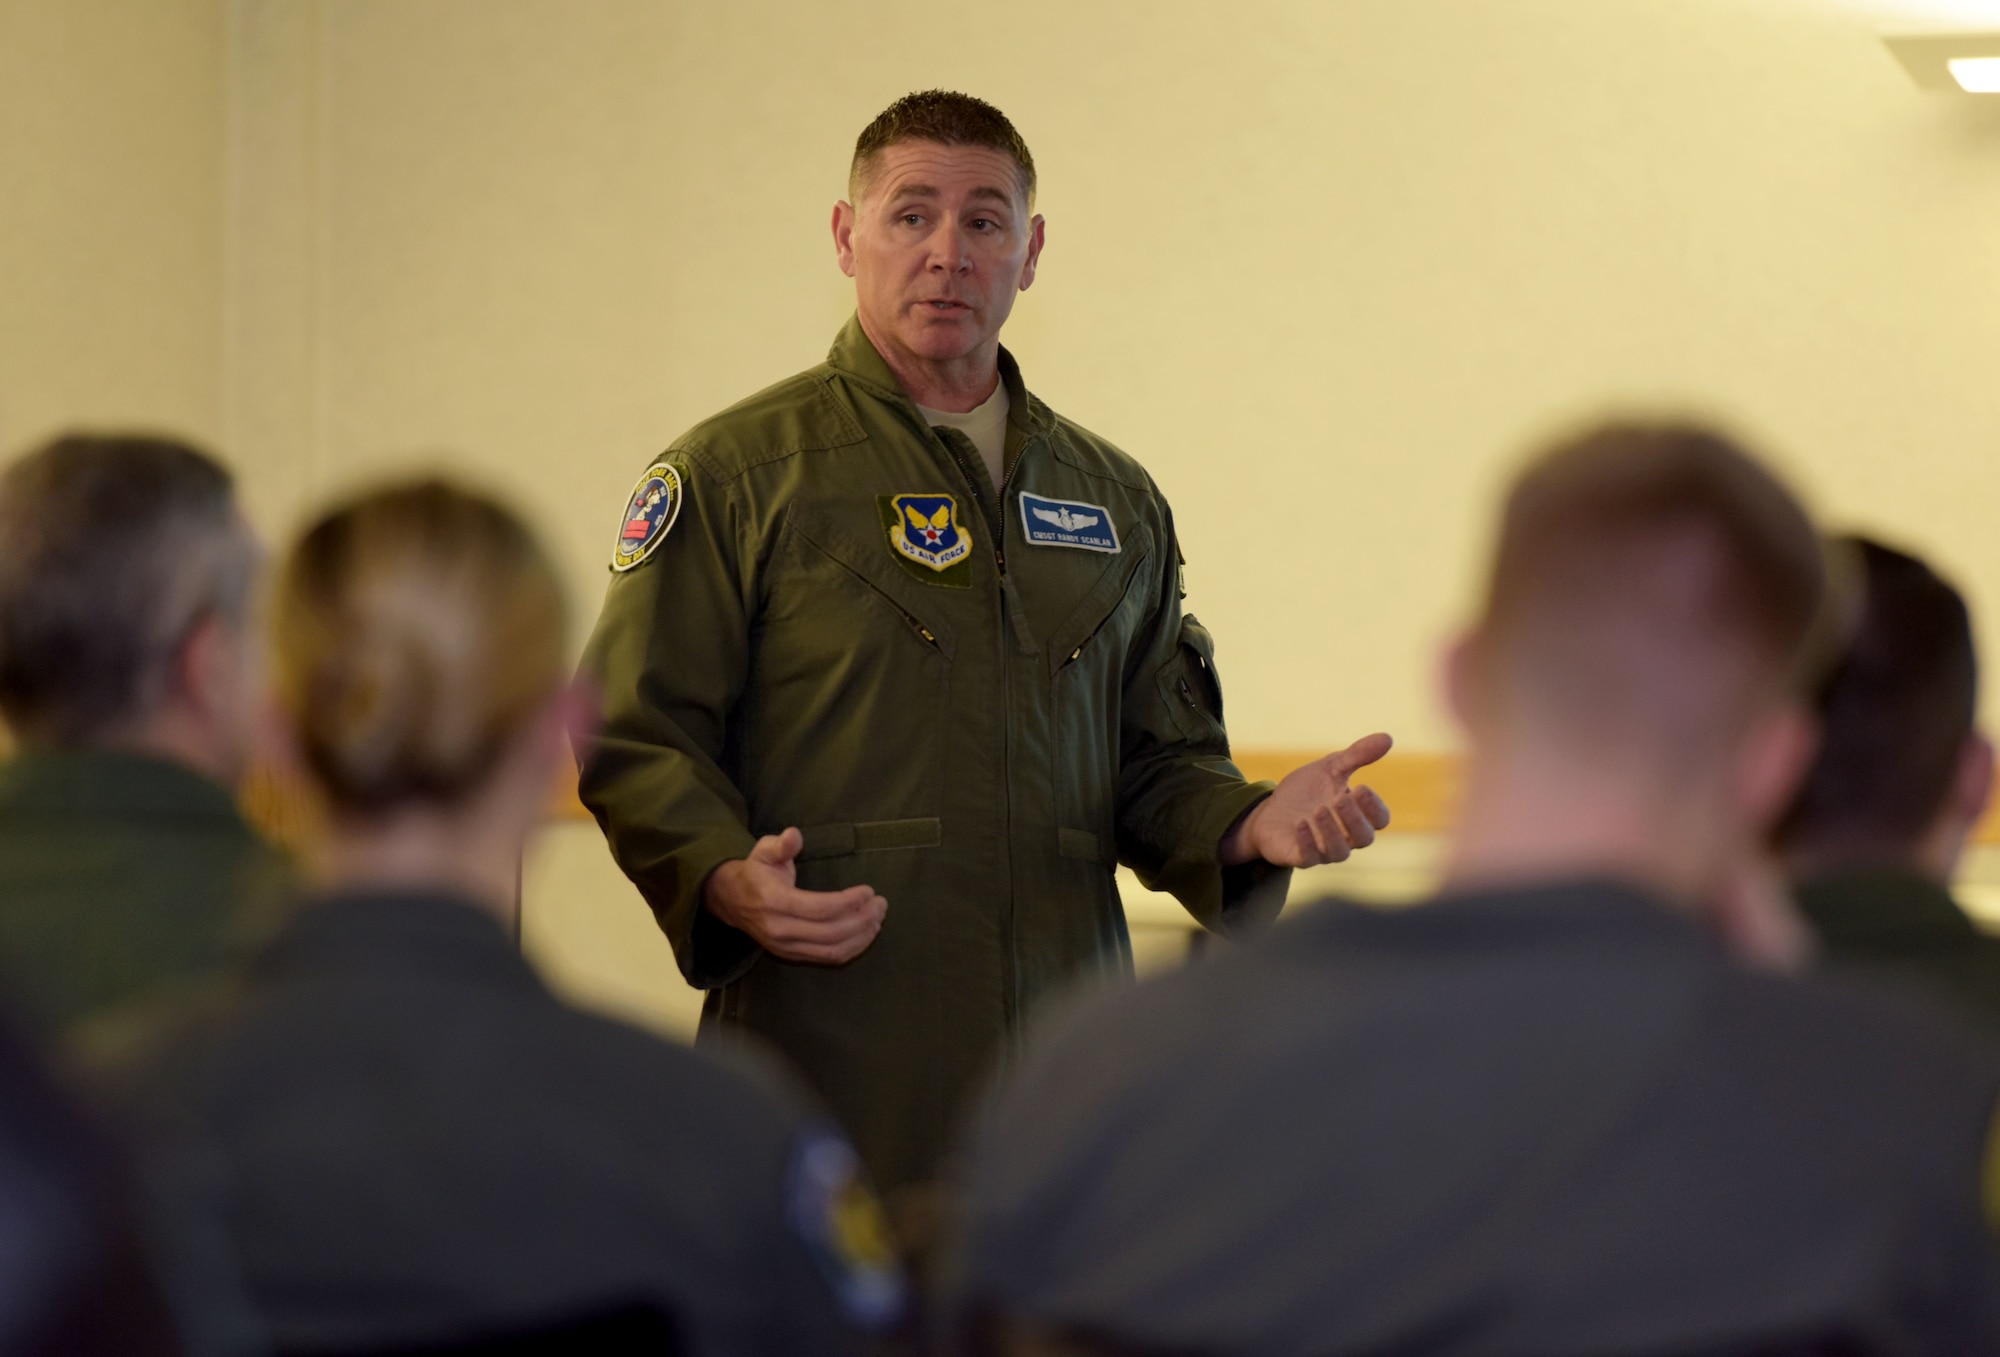 U.S. Air Force Chief Master Sgt. Randy Scanlan, Air Force Personnel Center chief of enlisted aircrew assignments, Joint Base San Antonio-Randolph, conducts a question and answer session with boom operators at RAF Mildenhall, Feb. 8, 2018. The question and answer session was one of three briefings during the senior enlisted leaders’ visit to discuss issues and programs pertaining to the CEA career fields. (U.S. Air Force photo by Senior Airman Alexandra West)